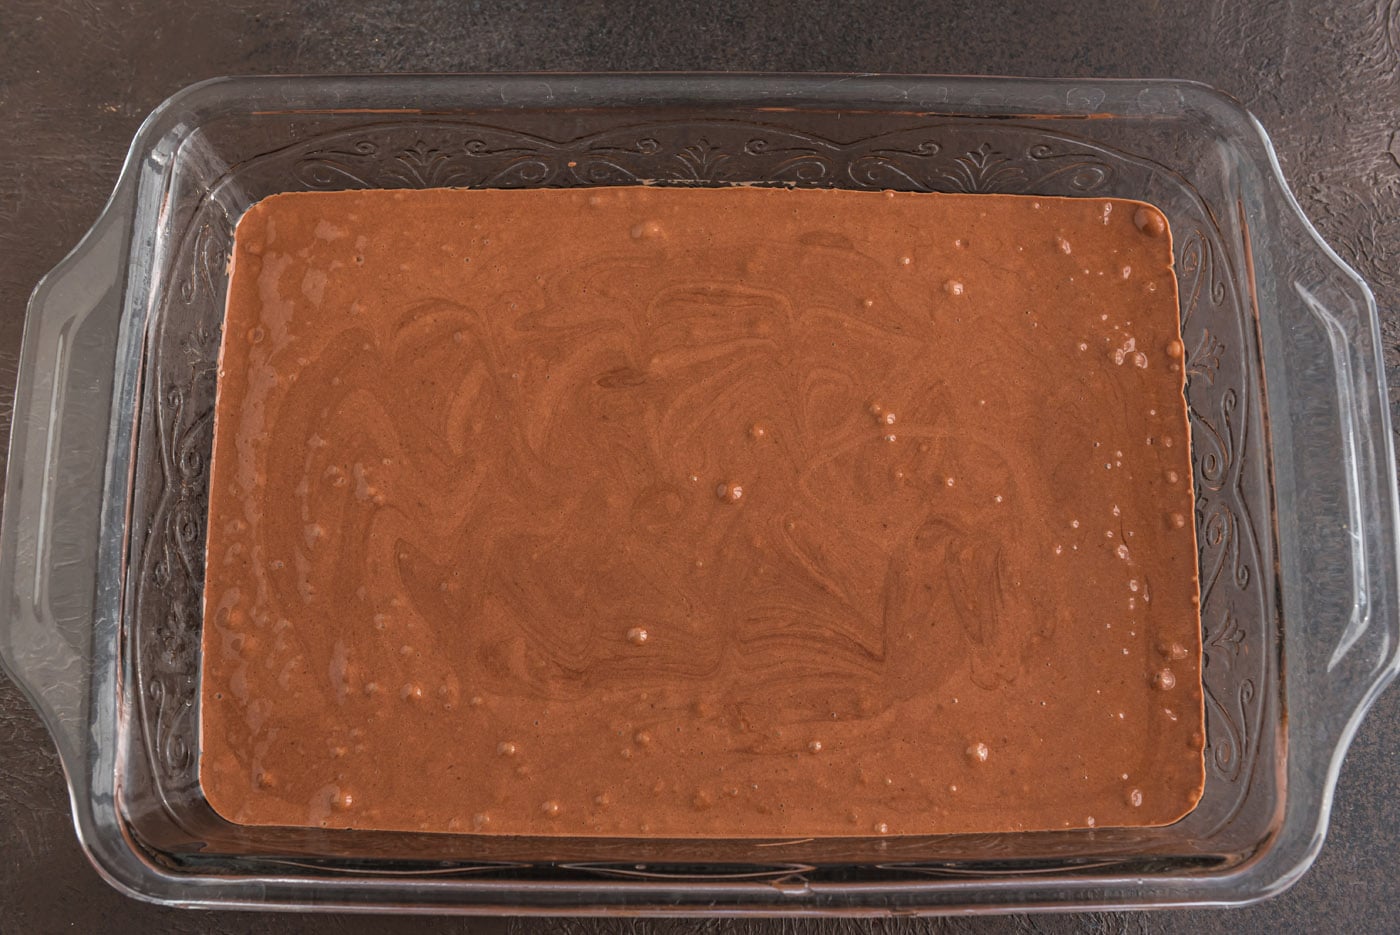 prepared devils food cake mix in a baking dish